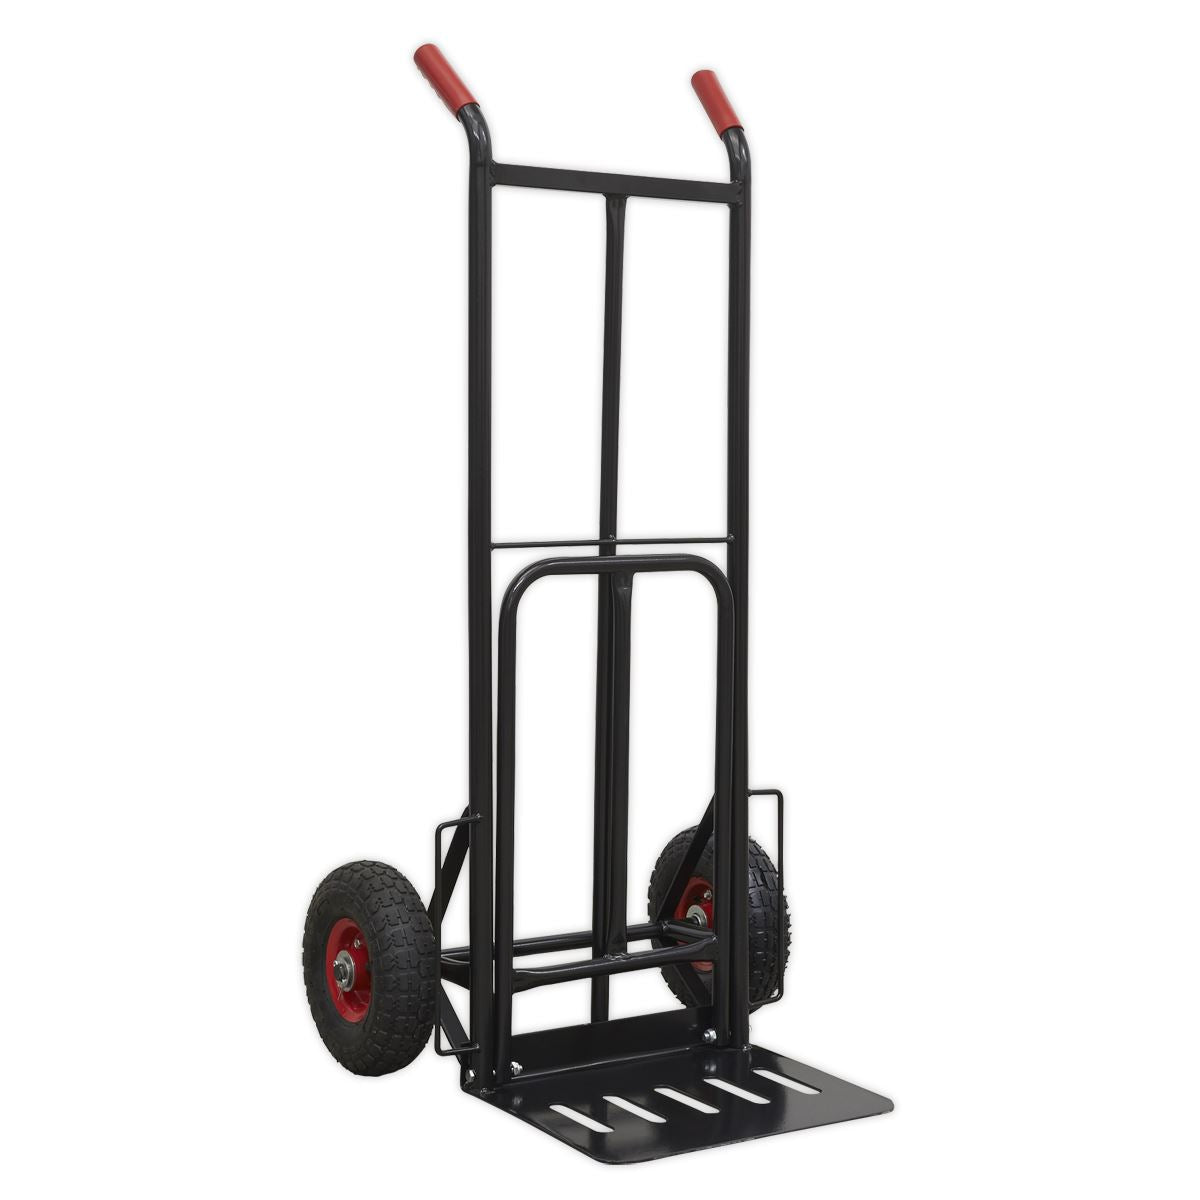 Sealey Premier Heavy-Duty Sack Truck with PU Tyres 300kg Capacity